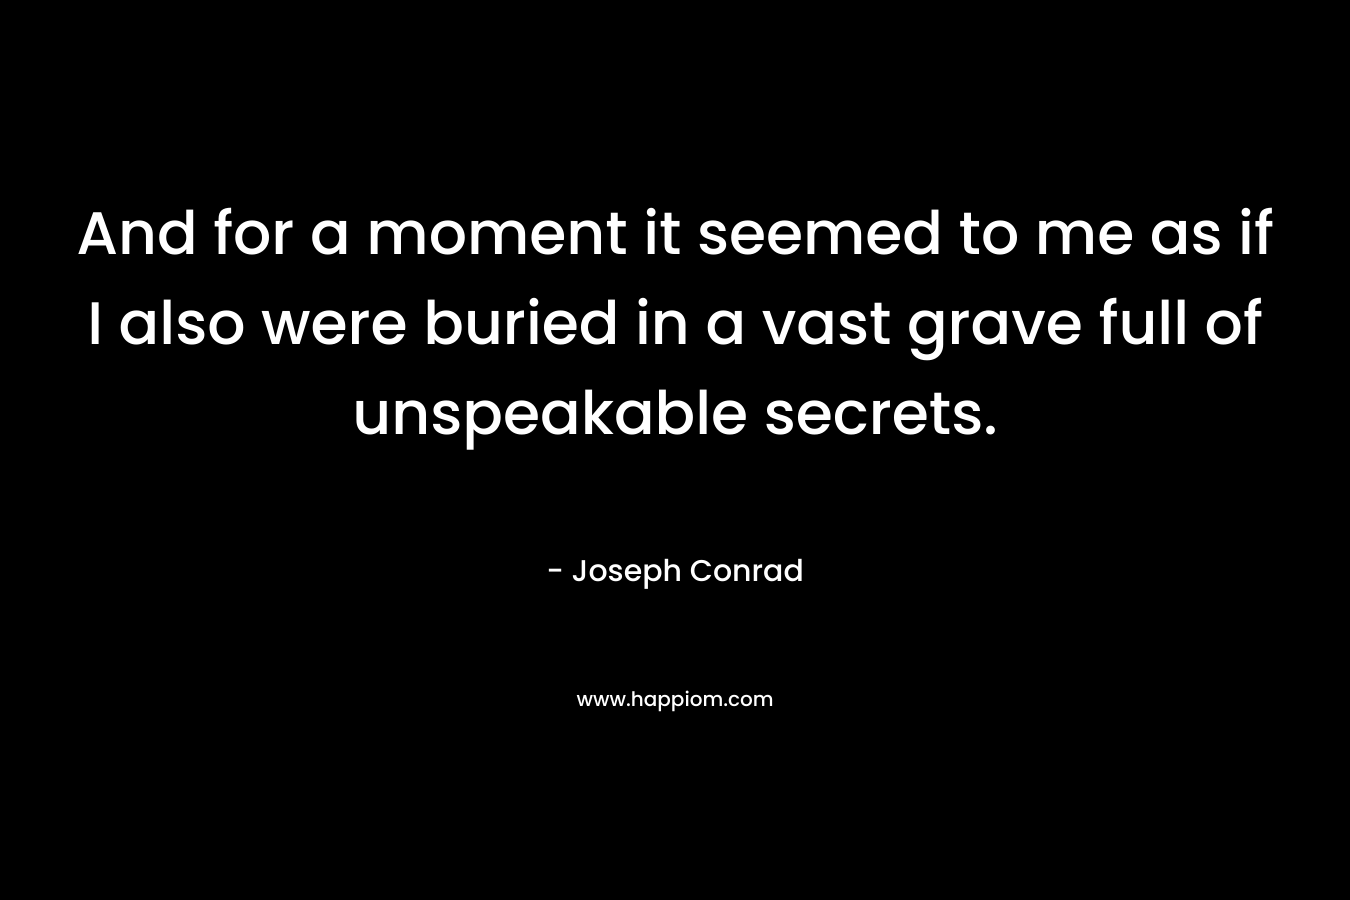 And for a moment it seemed to me as if I also were buried in a vast grave full of unspeakable secrets. – Joseph Conrad